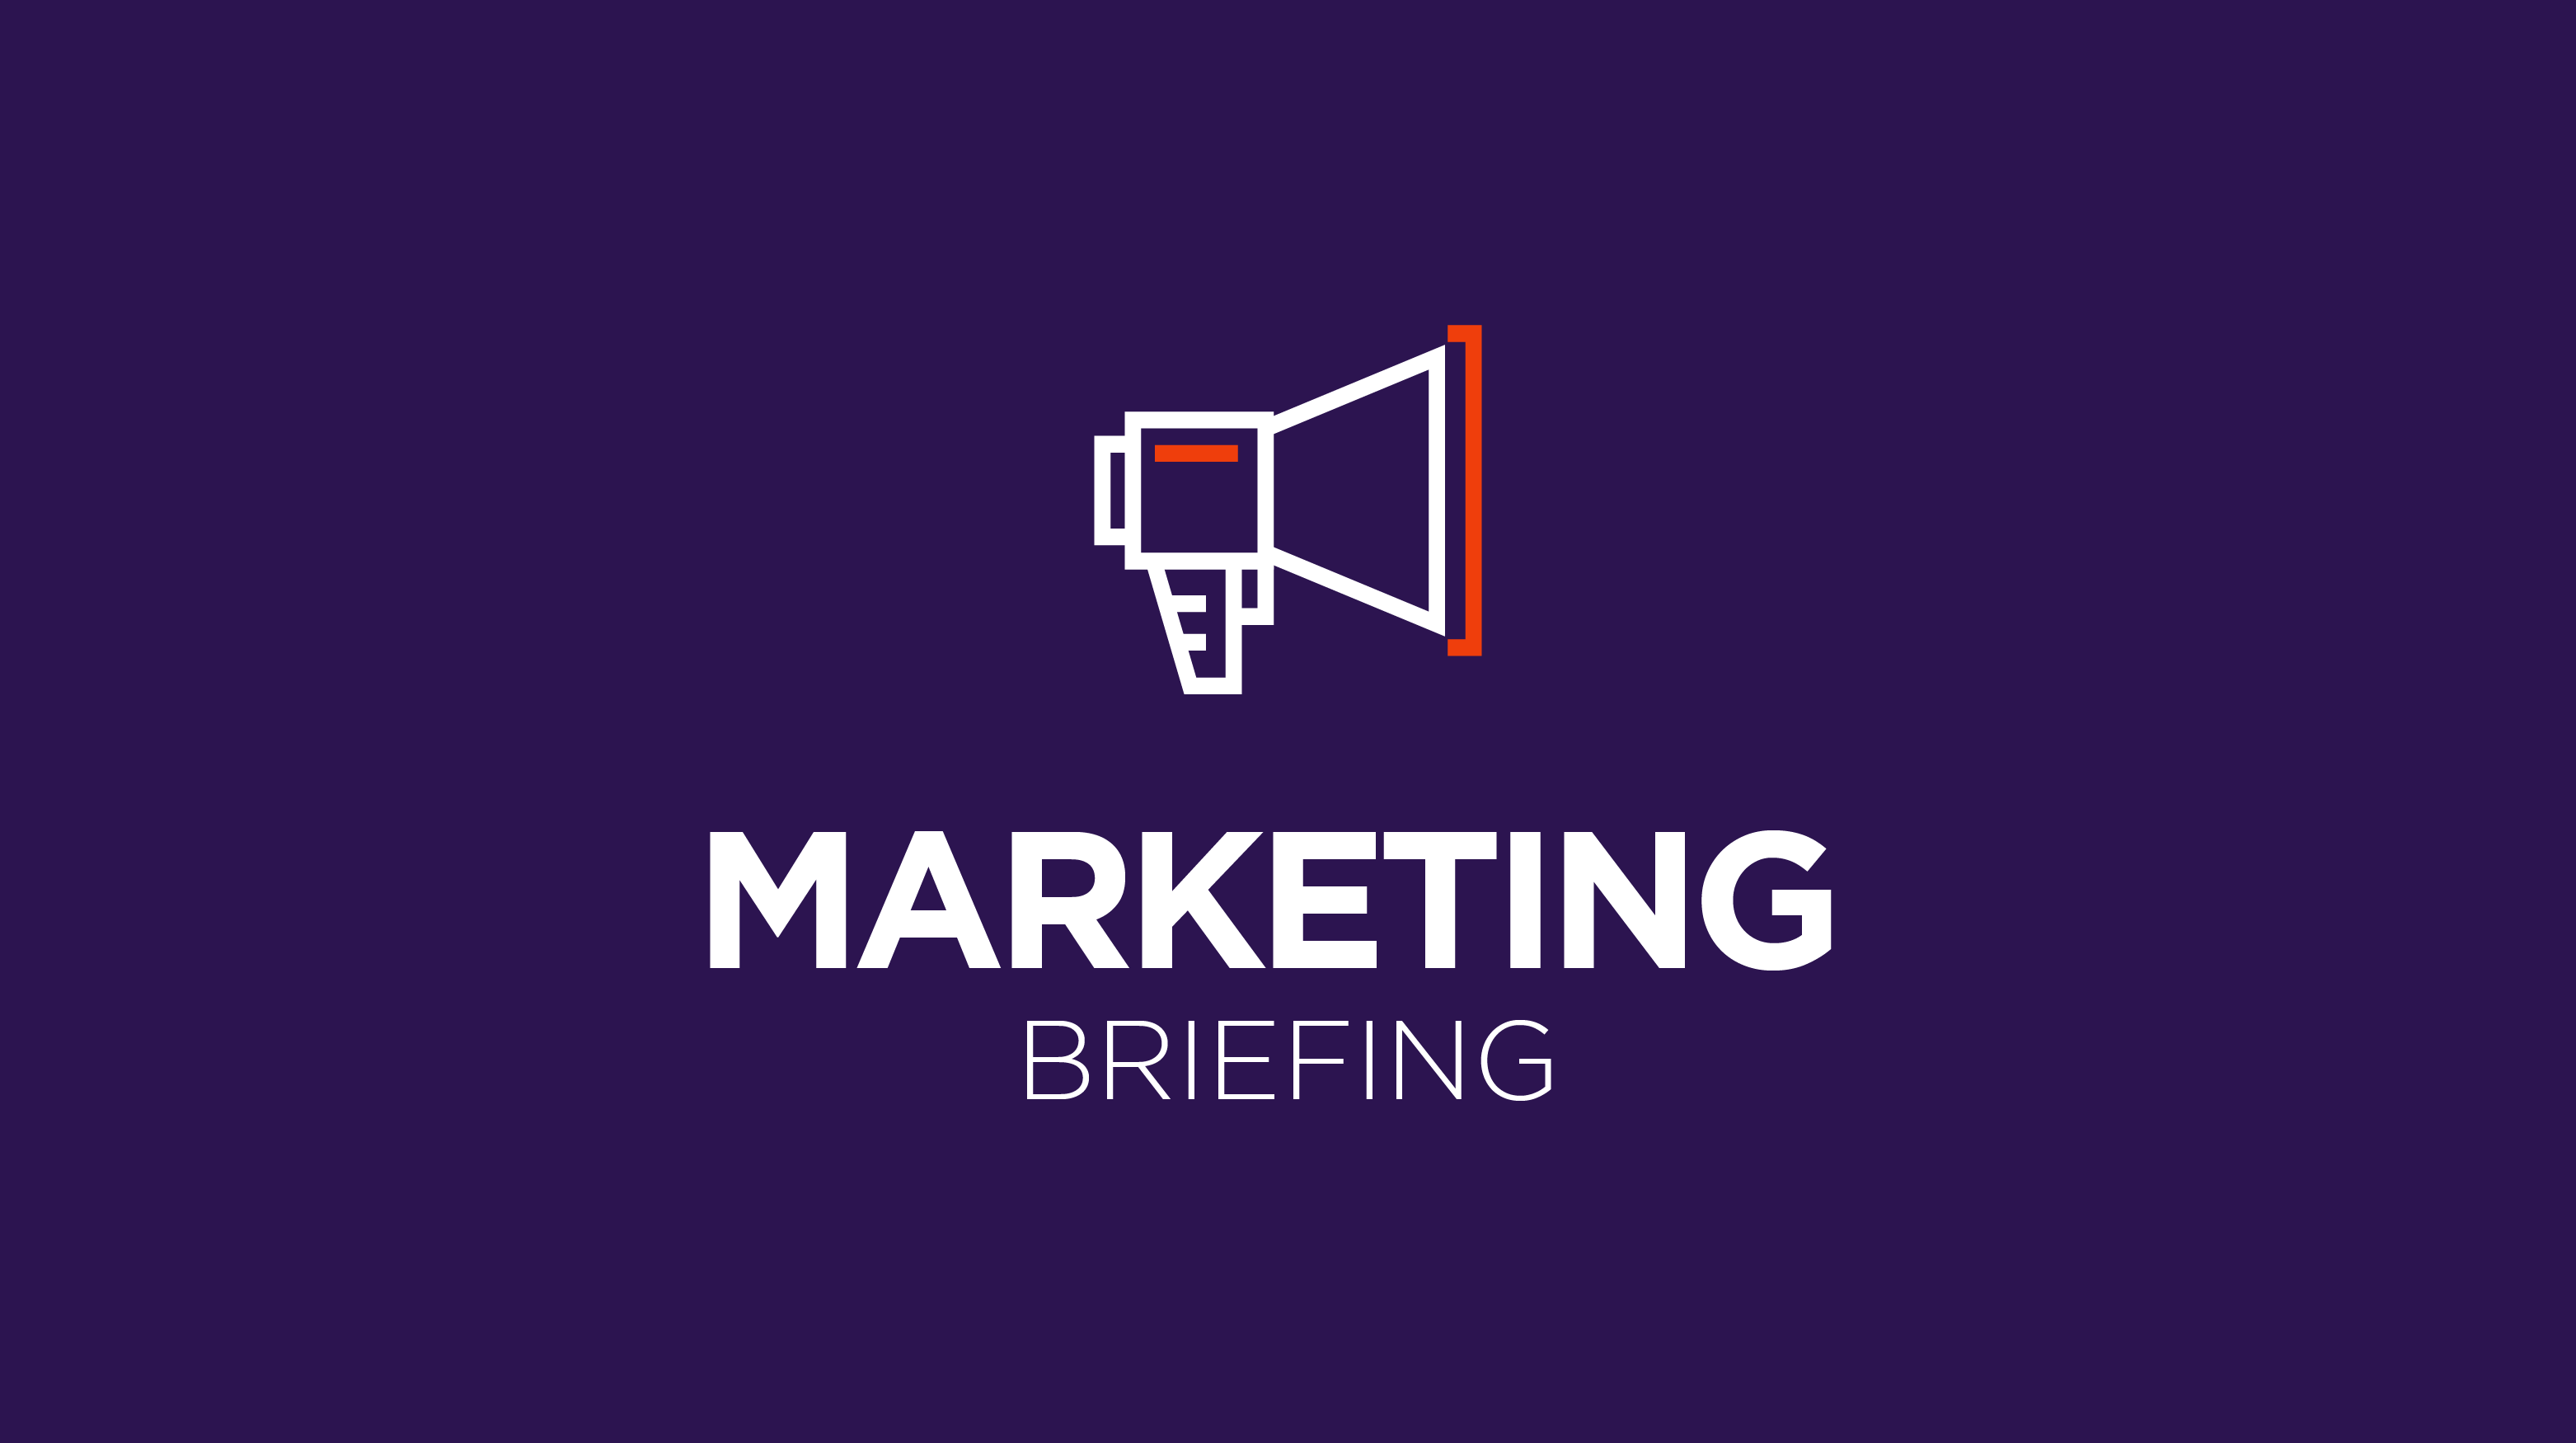 Marketing Briefing: Bank marketing during a time of financial uncertainty